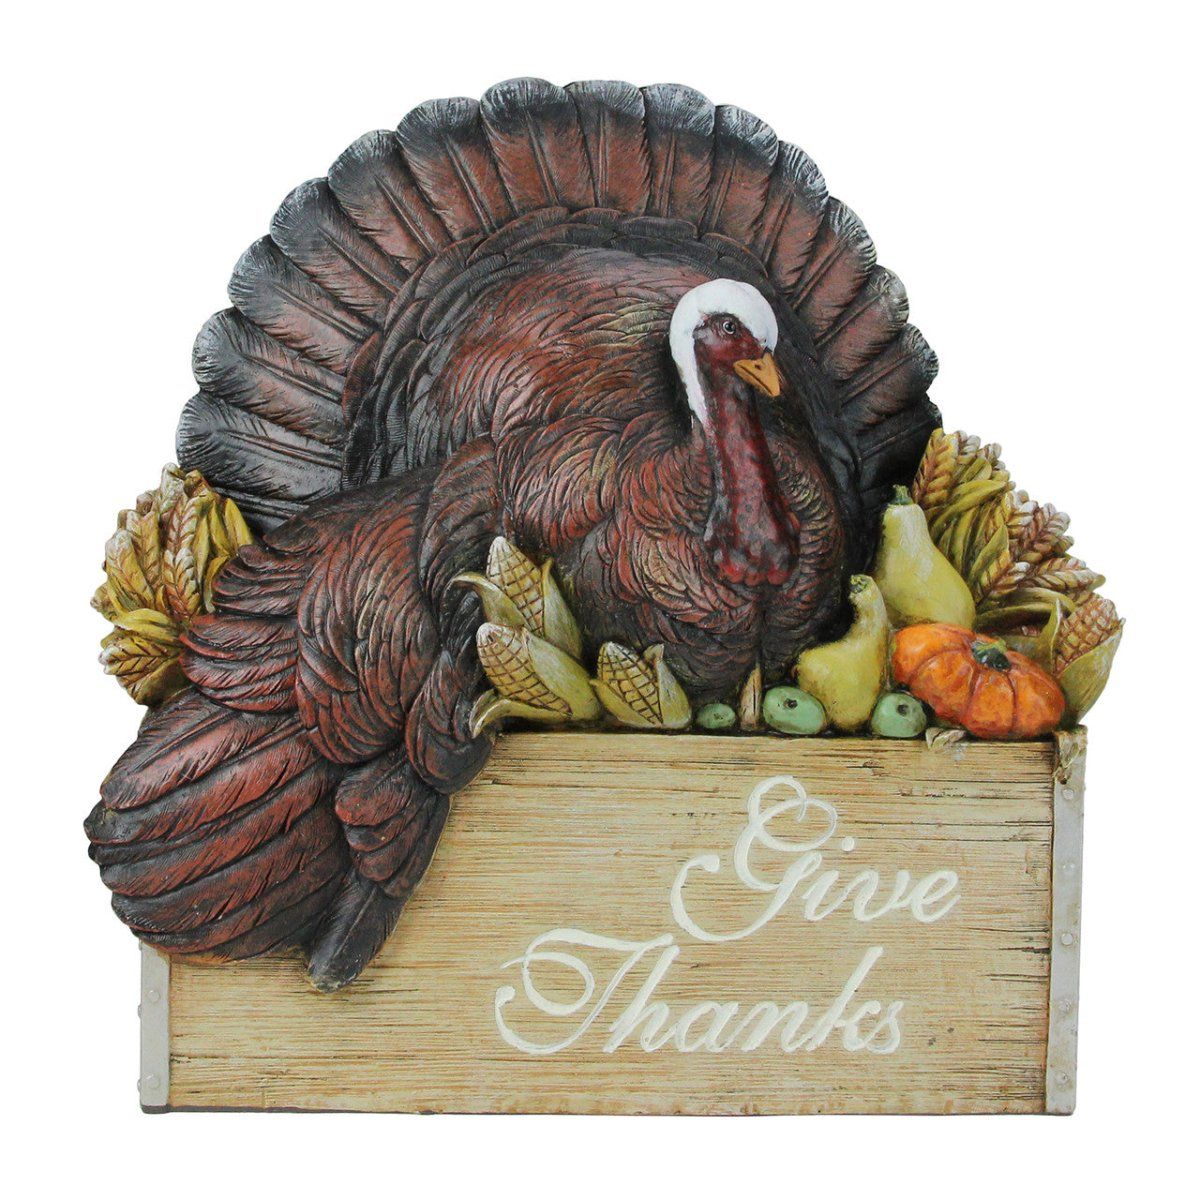 Shop For Thanksgiving Turkey in a Crate Tabletop Decoration 131221